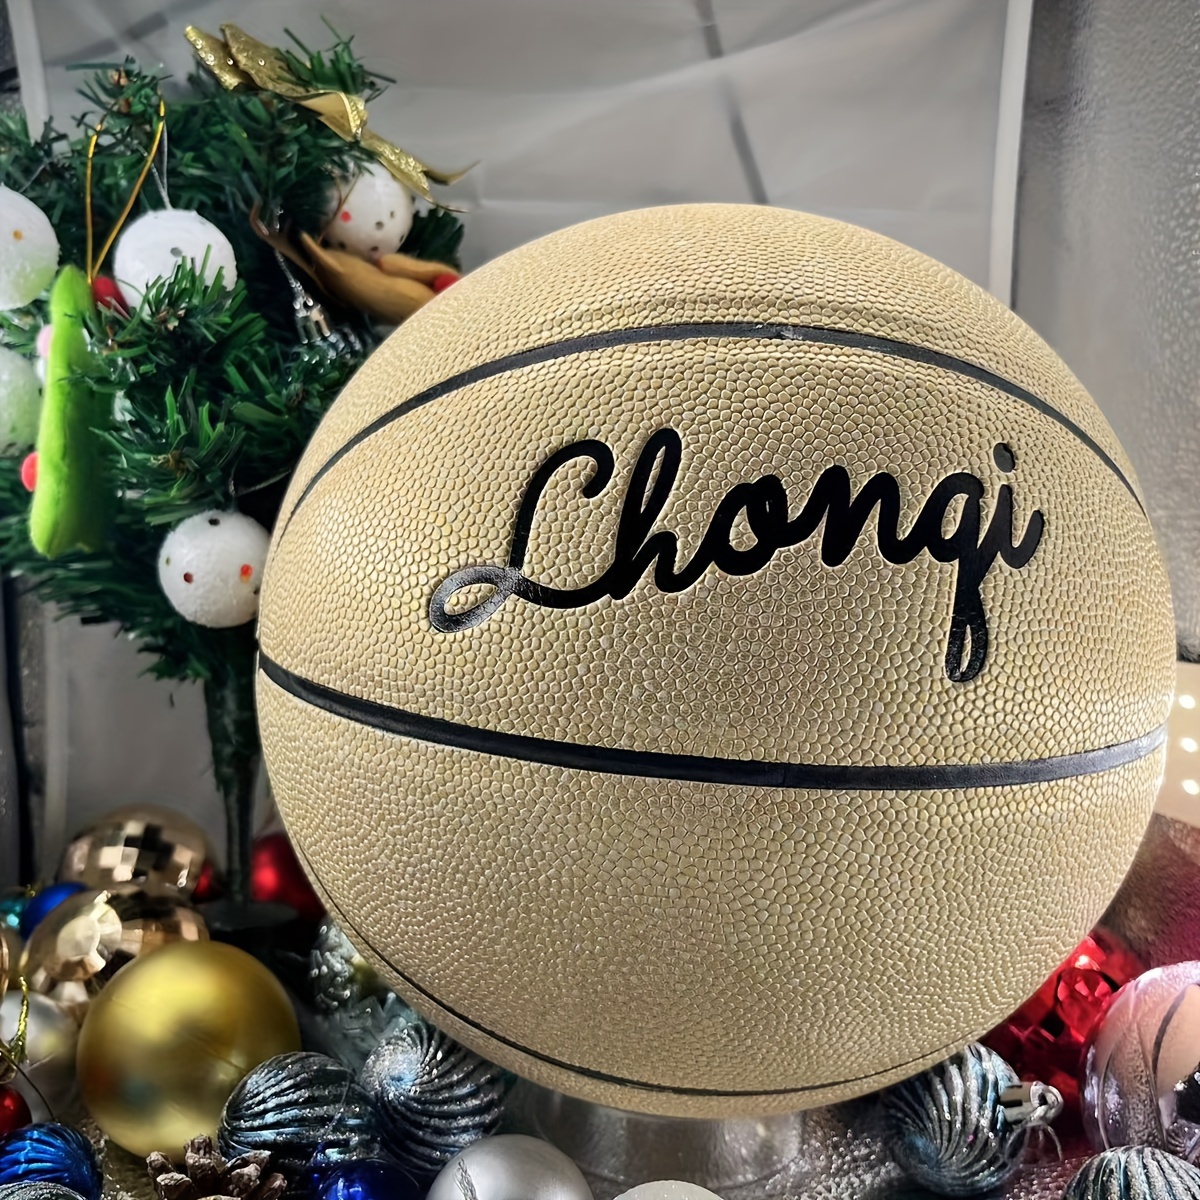 Merry christmas, many red basketballs with a golden basketball on